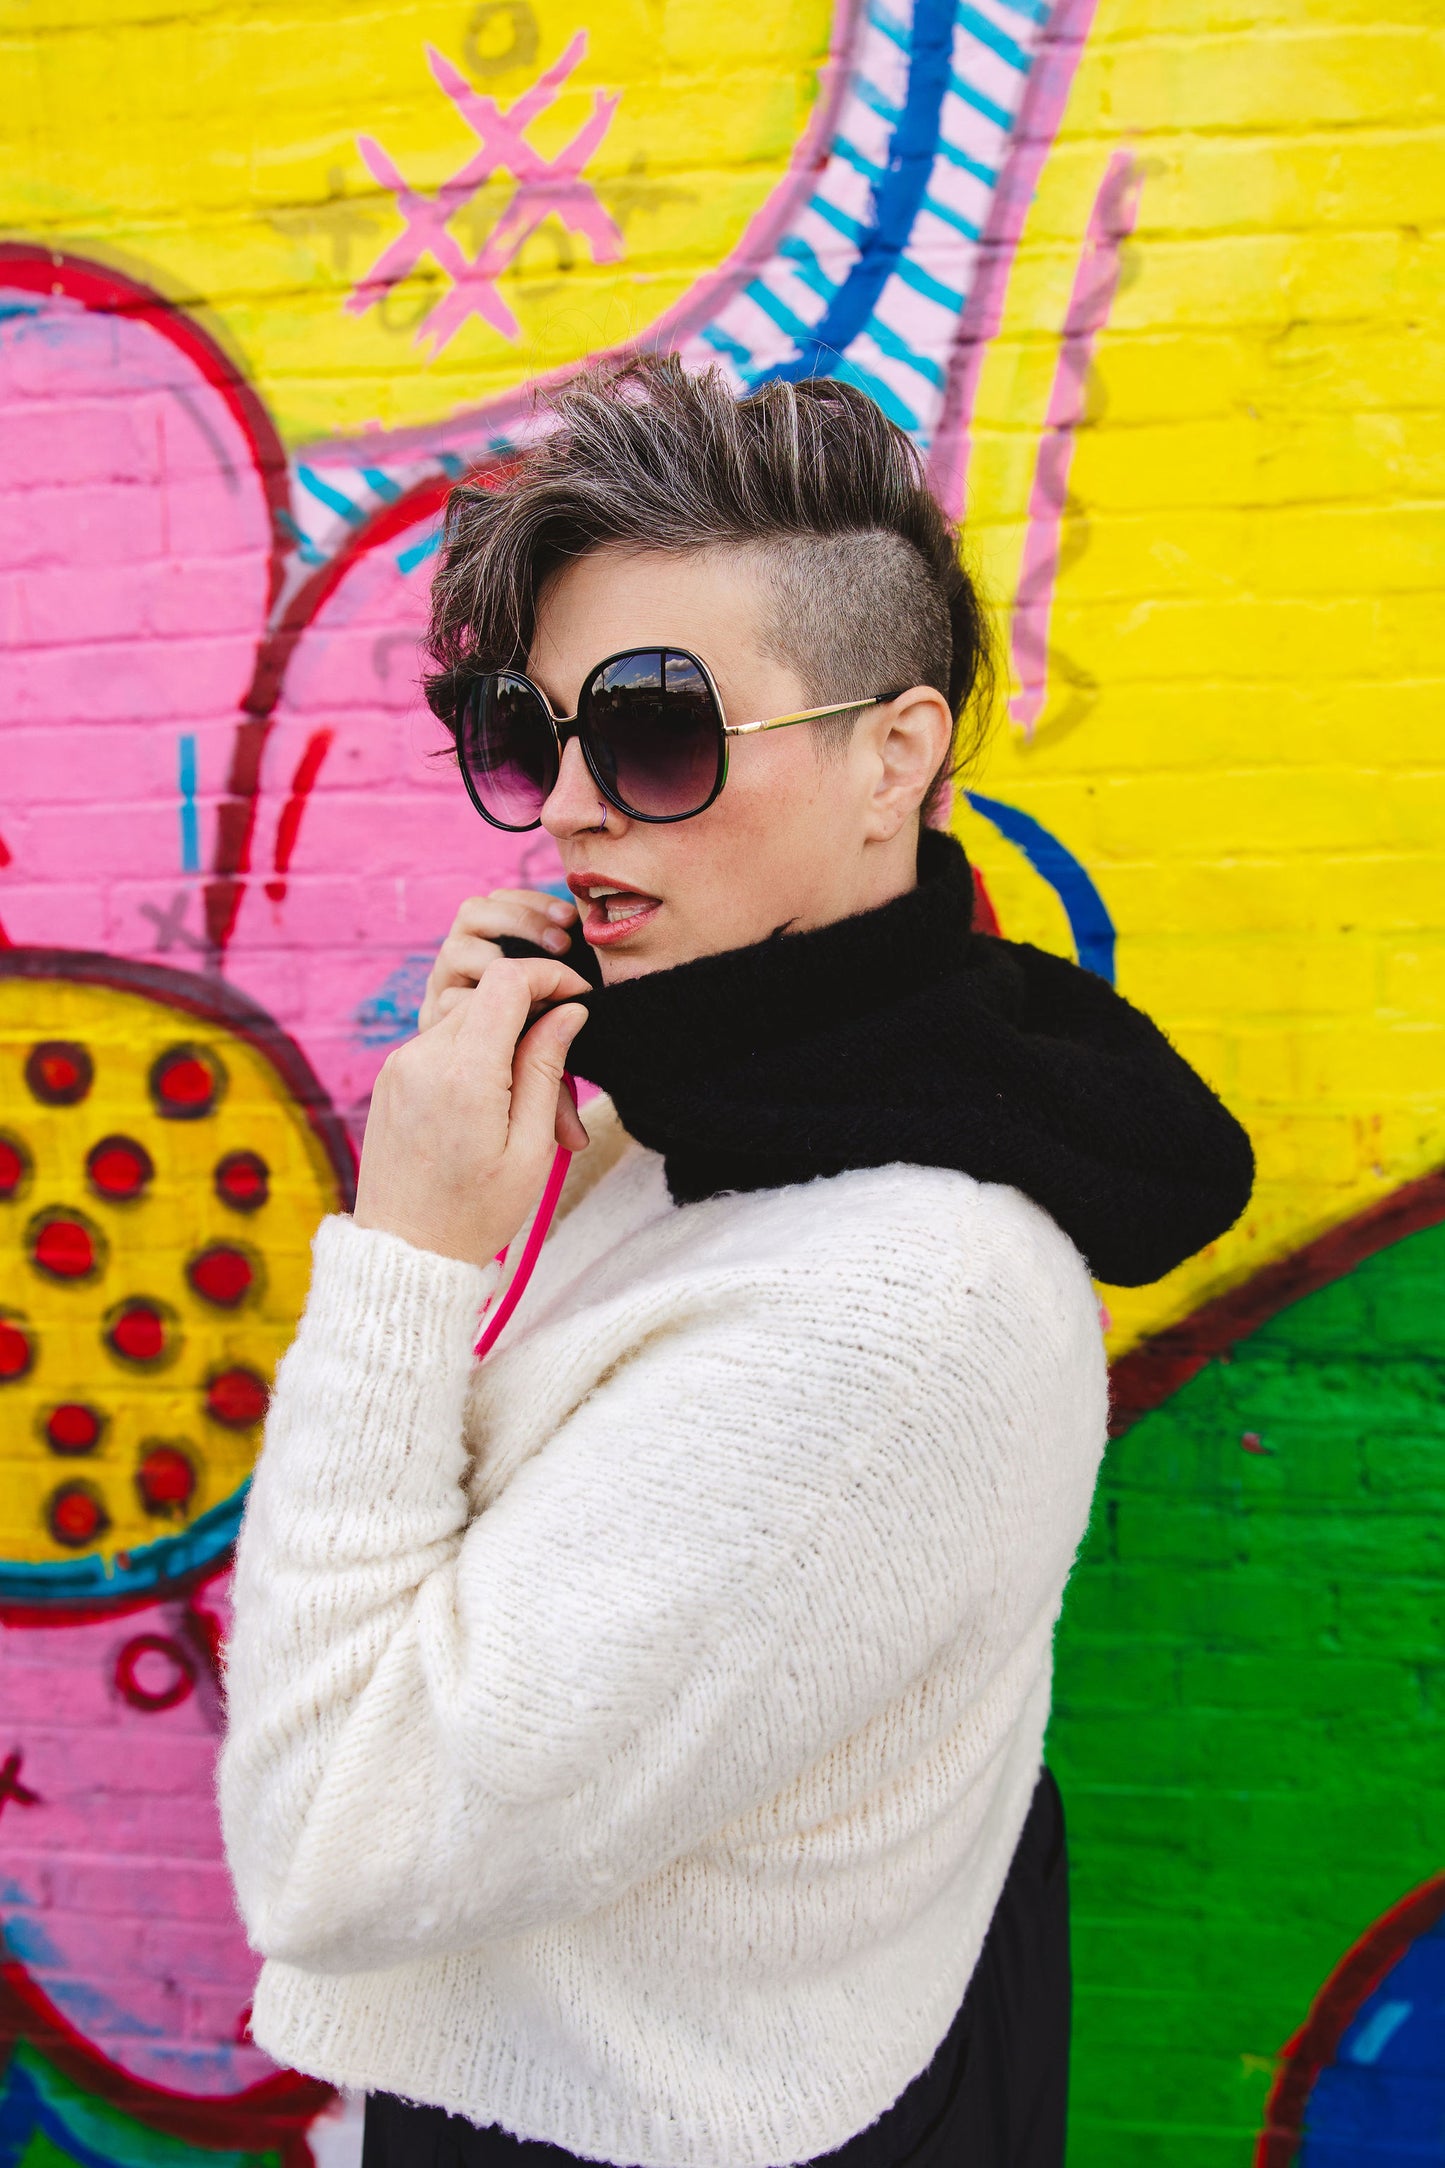 Seen from the side, Jen fingers the soft collar of her black and white knit hoodie. The hoodie is designed in a graphic colorblock effect, featuring neon pink sweater strings. A wall mural can be seen in the background.